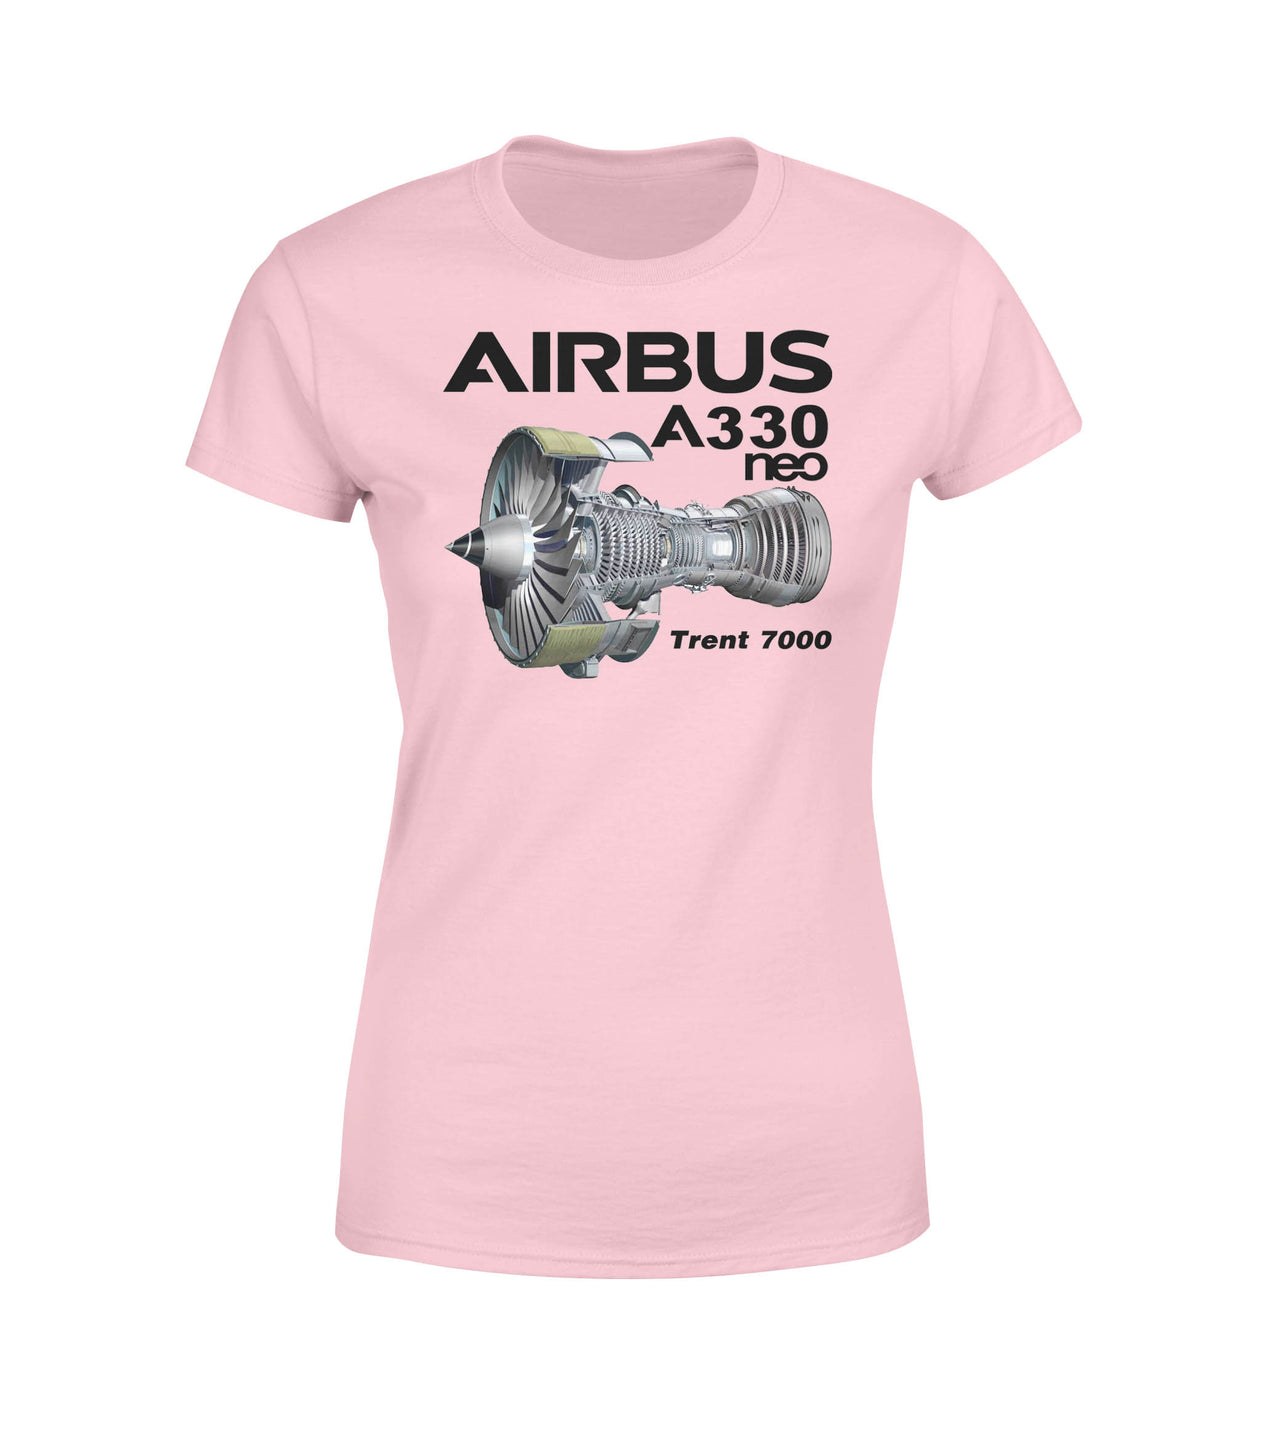 Airbus A330neo & Trent 7000 Engine Designed Women T-Shirts